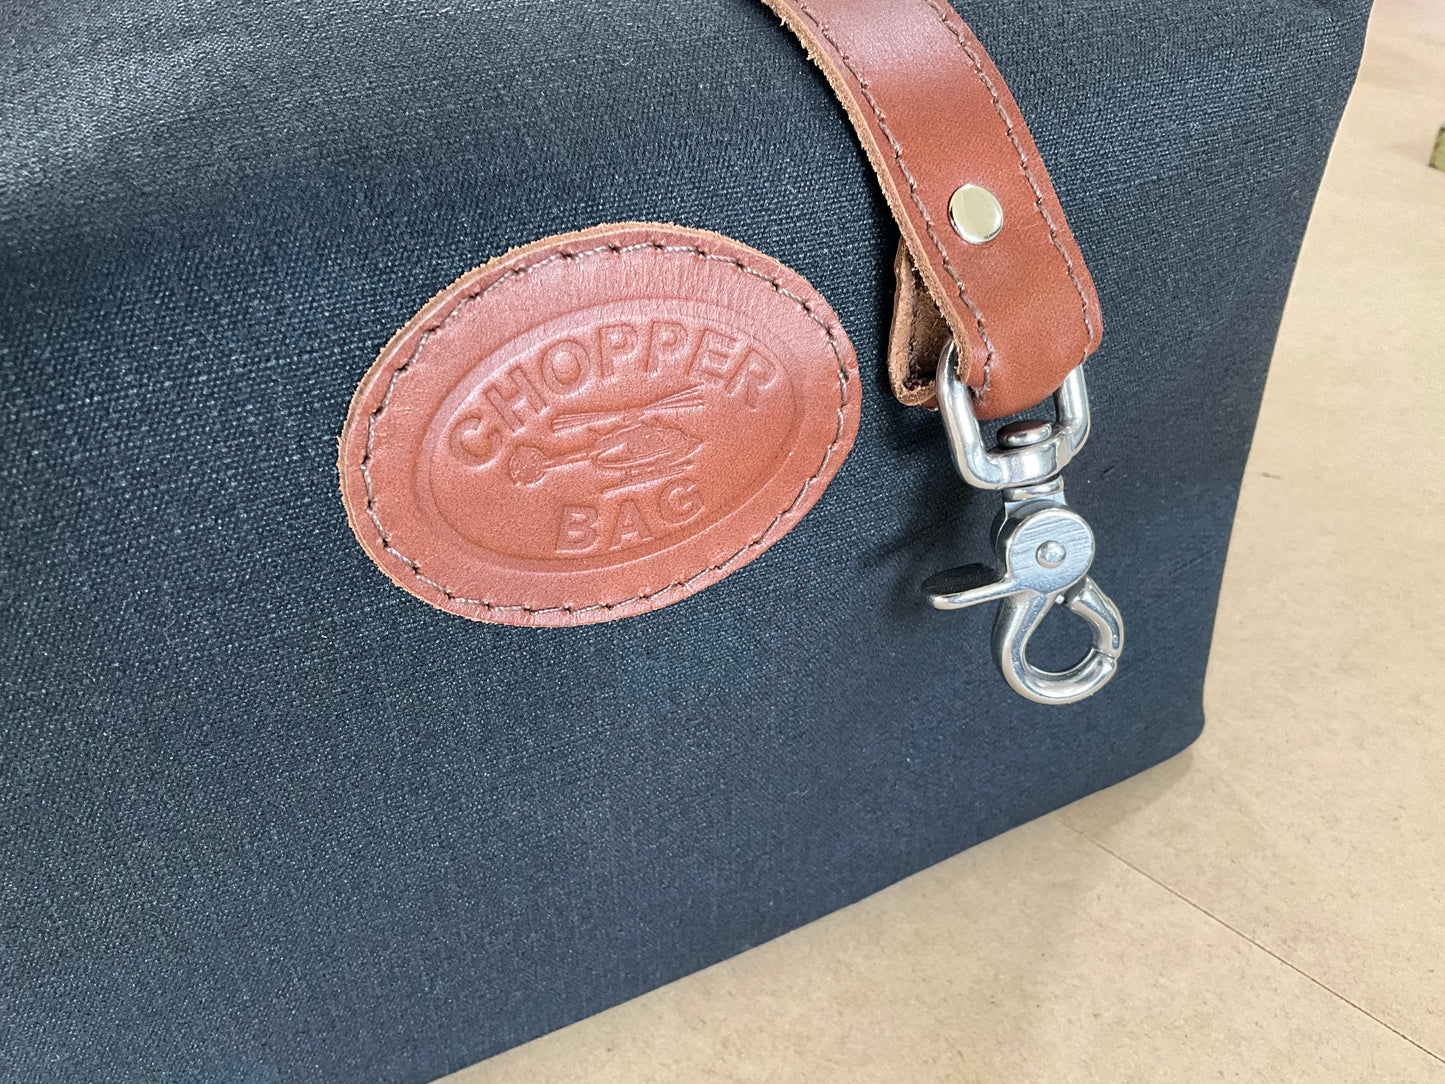 Chopper Bag Product in stock